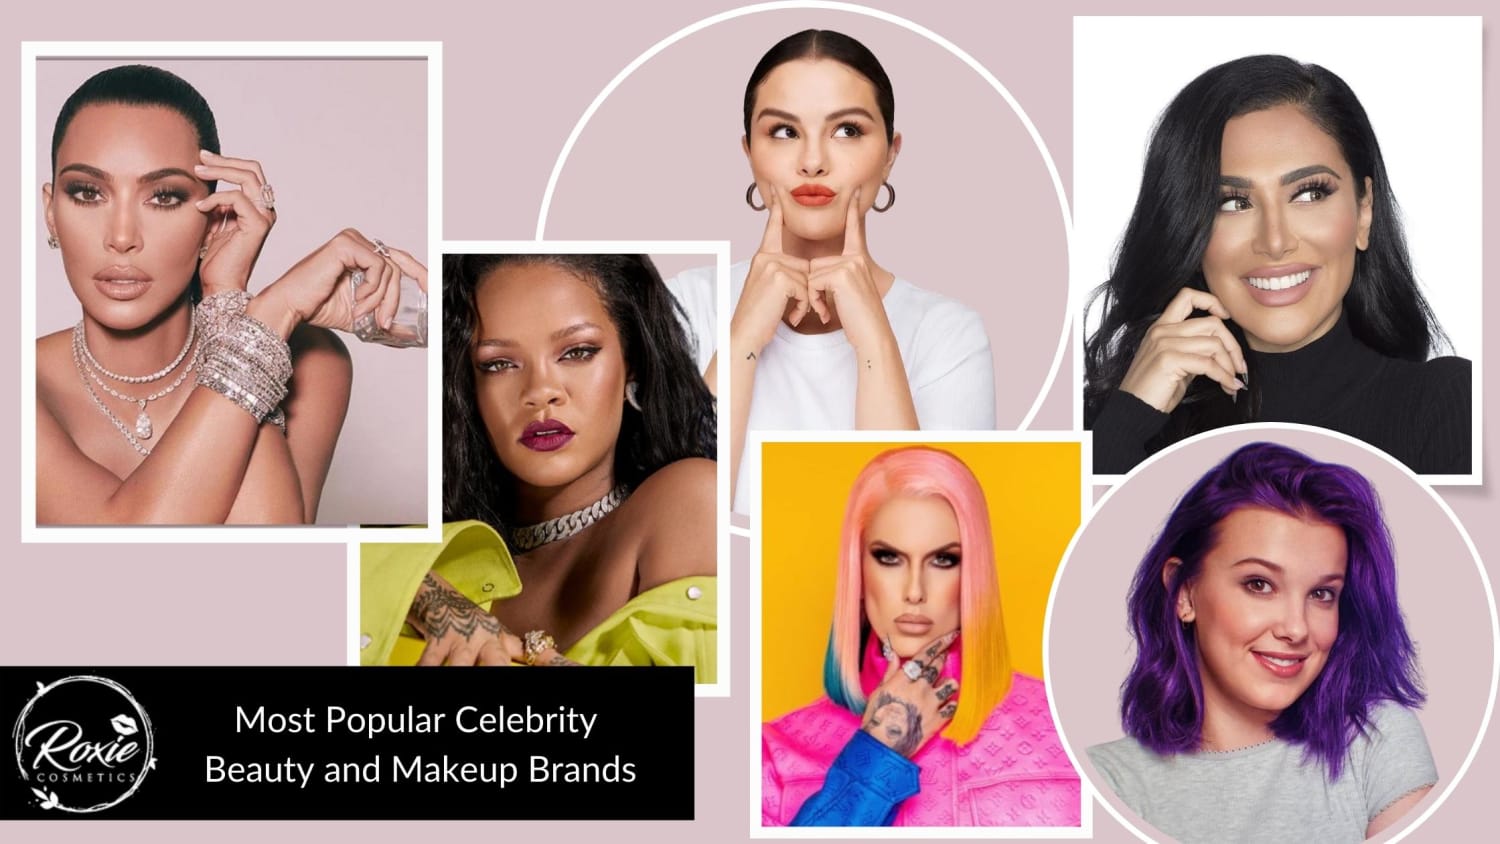 Most Popular Celebrity Beauty and Makeup Brands